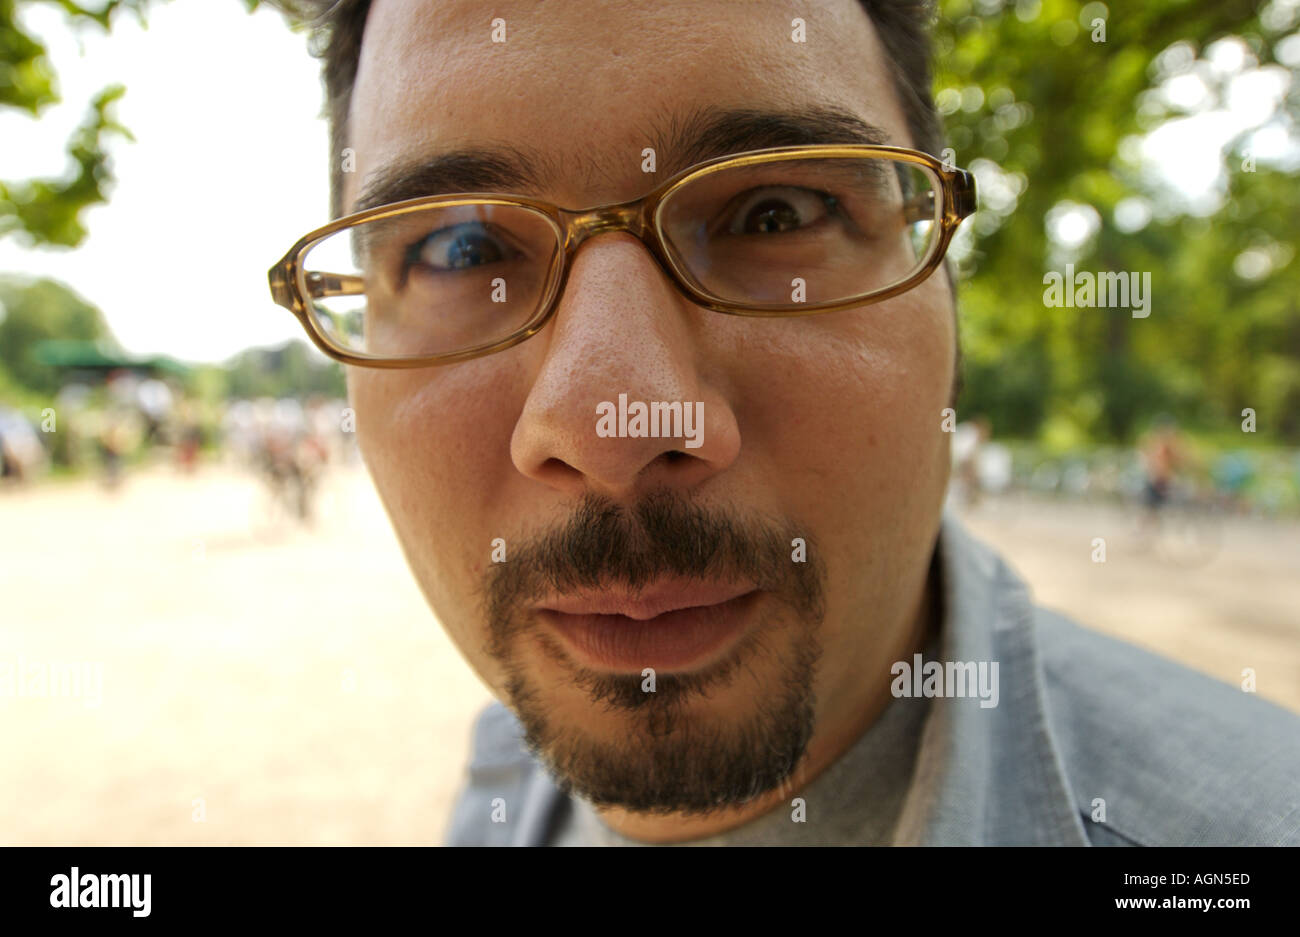 funny portrait of a man glasses moustache close up distord distorted nose big look looking Stock Photo